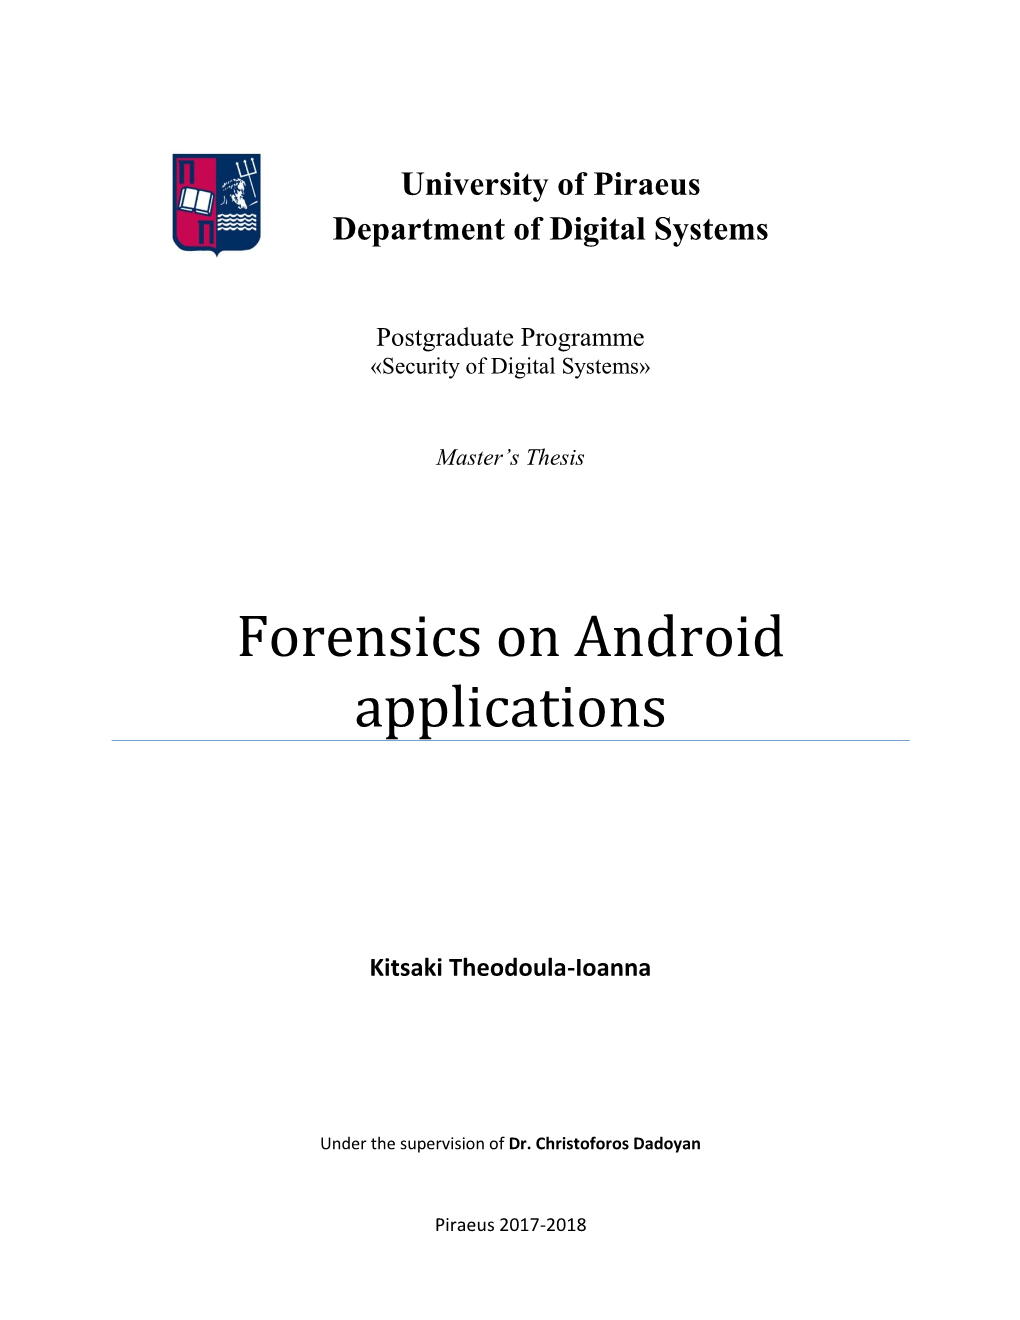 Forensics on Android Applications